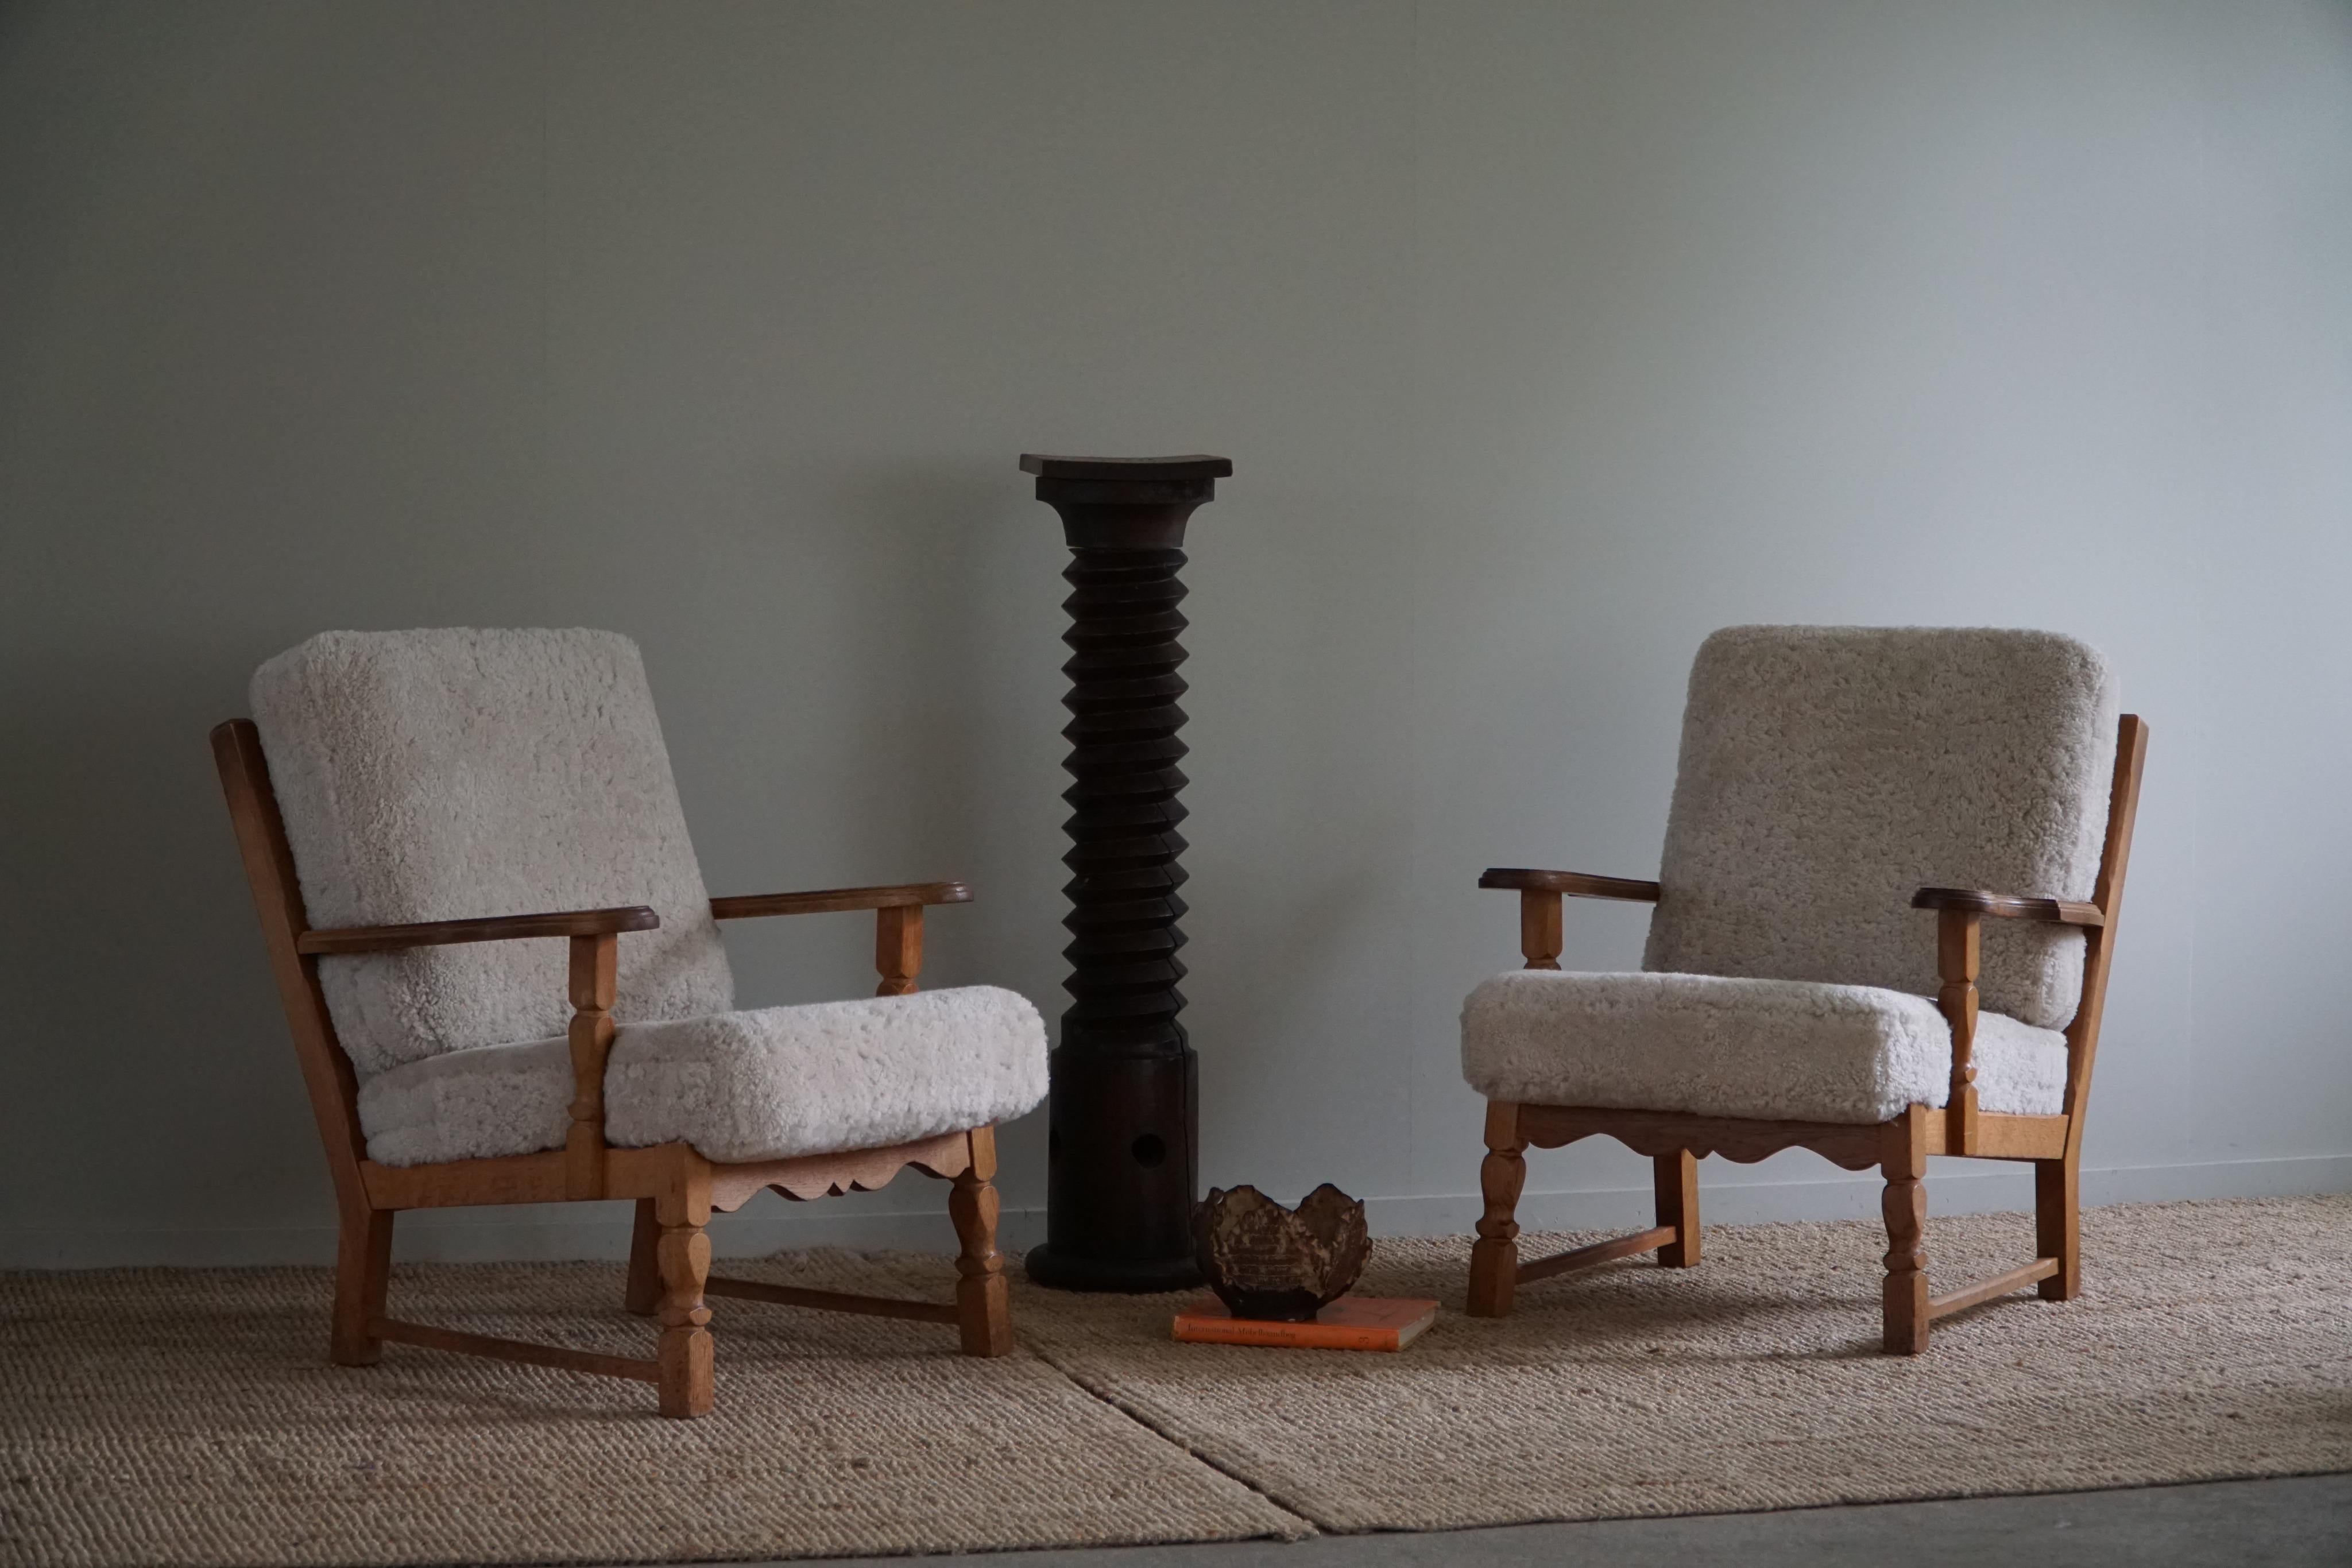 A stunning pair of Danish modern lounge chairs in the style of Henning Kjærnulf. Made in oak and reupholstered cushions in a great quality shearling lambswool. Made in 1960s by a Danish Cabinetmaker. The general impression is really good.

This nice